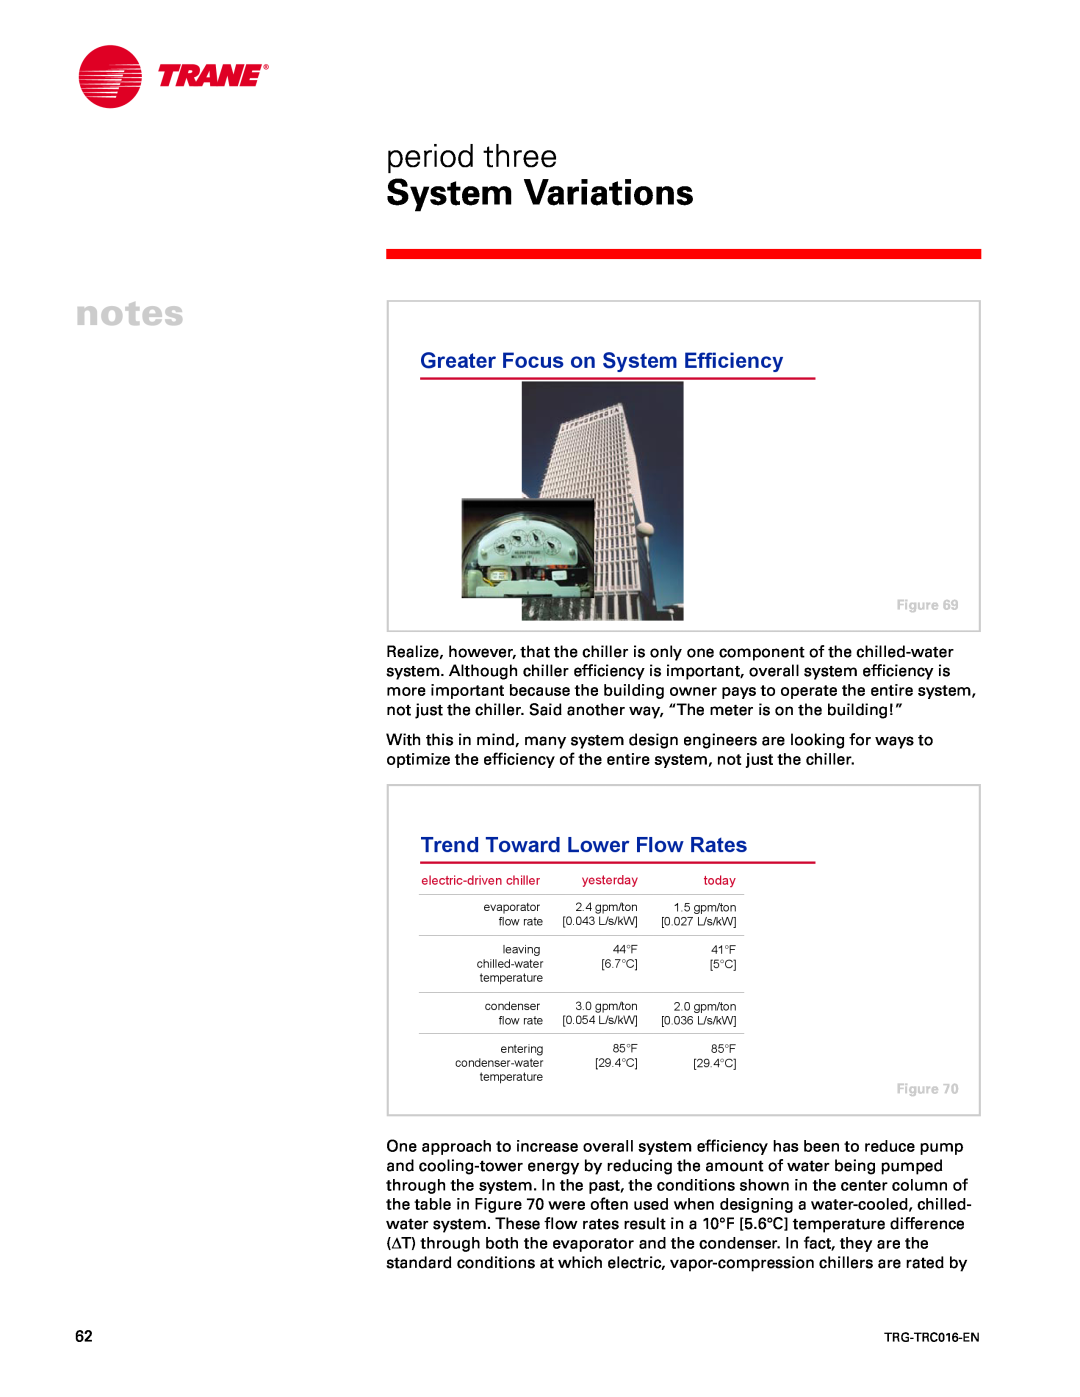 Trane TRG-TRC016-EN manual Greater Focus on System Efficiency, Trend Toward Lower Flow Rates, notes, System Variations 